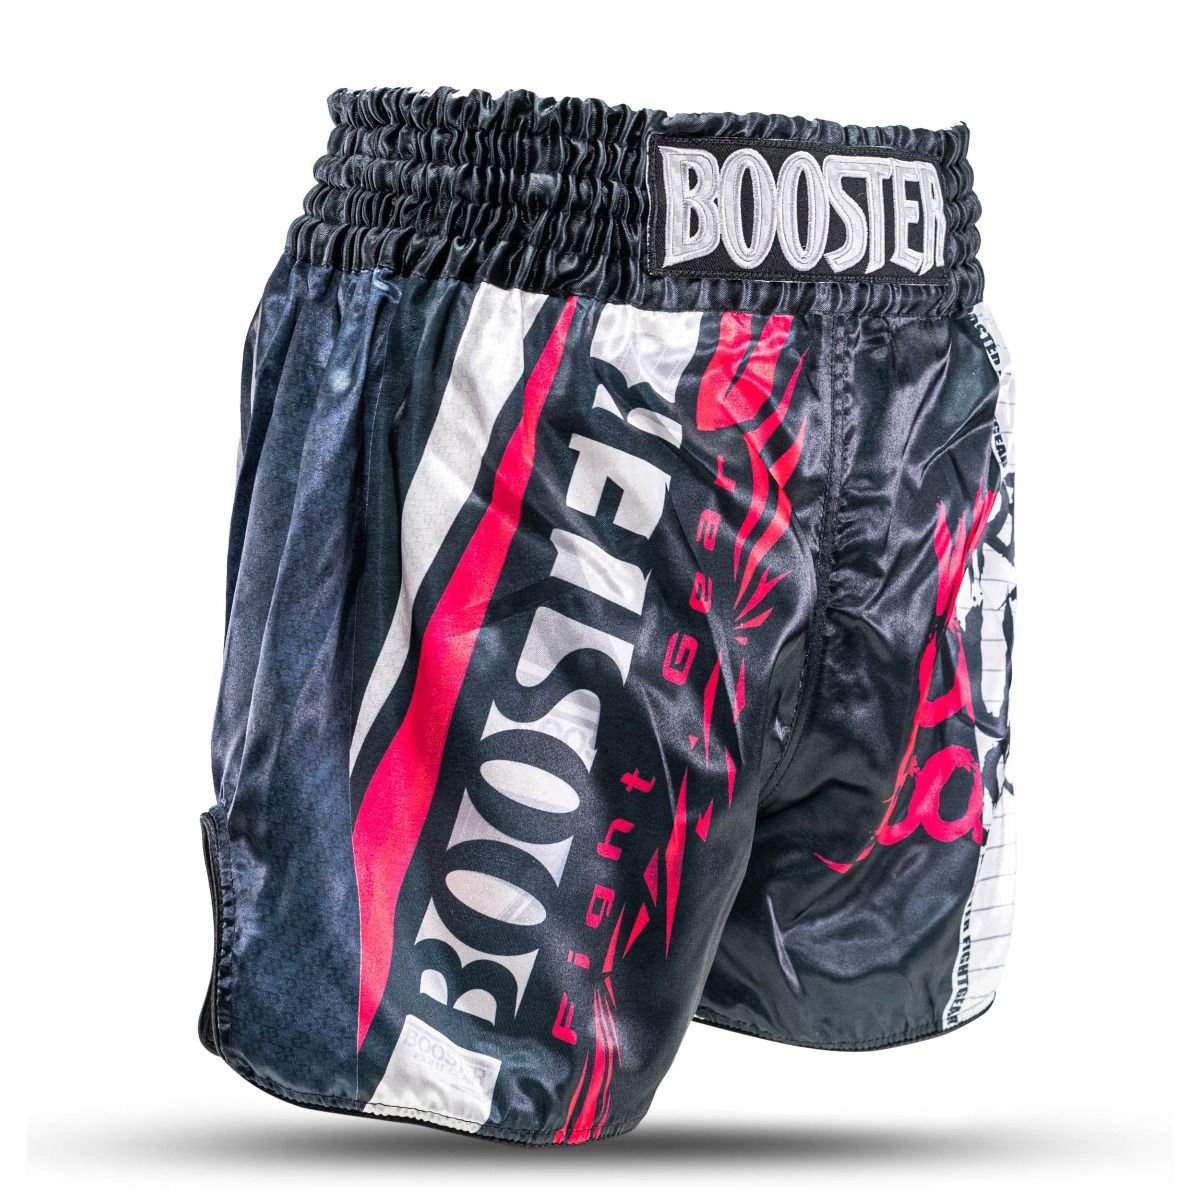 Booster Muay Thai Shorts - TBT Performance 4